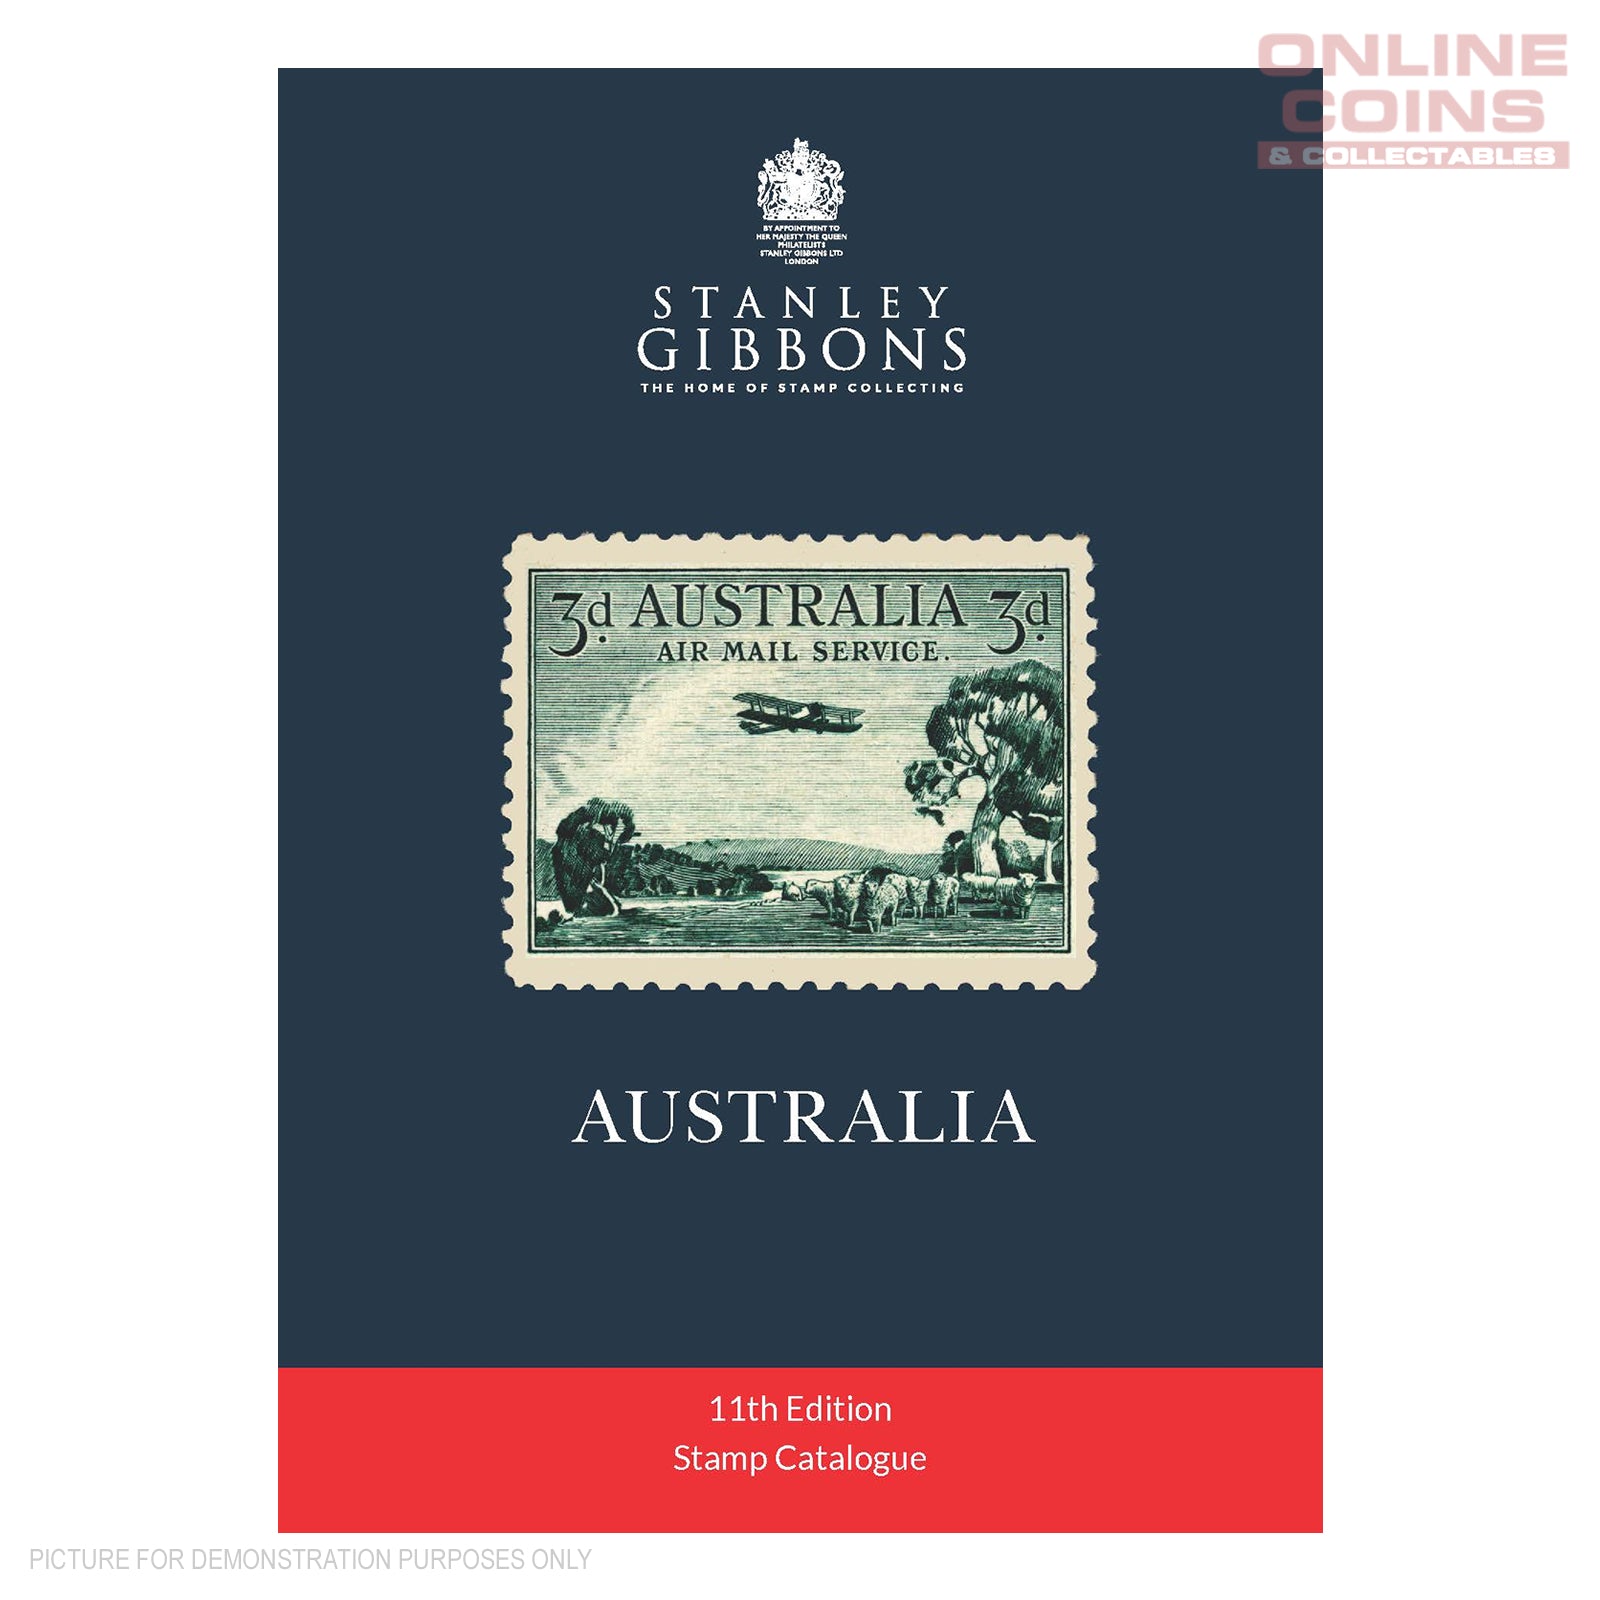 2018 Stanley Gibbons Australia Stamp Catalogue 11th Edition